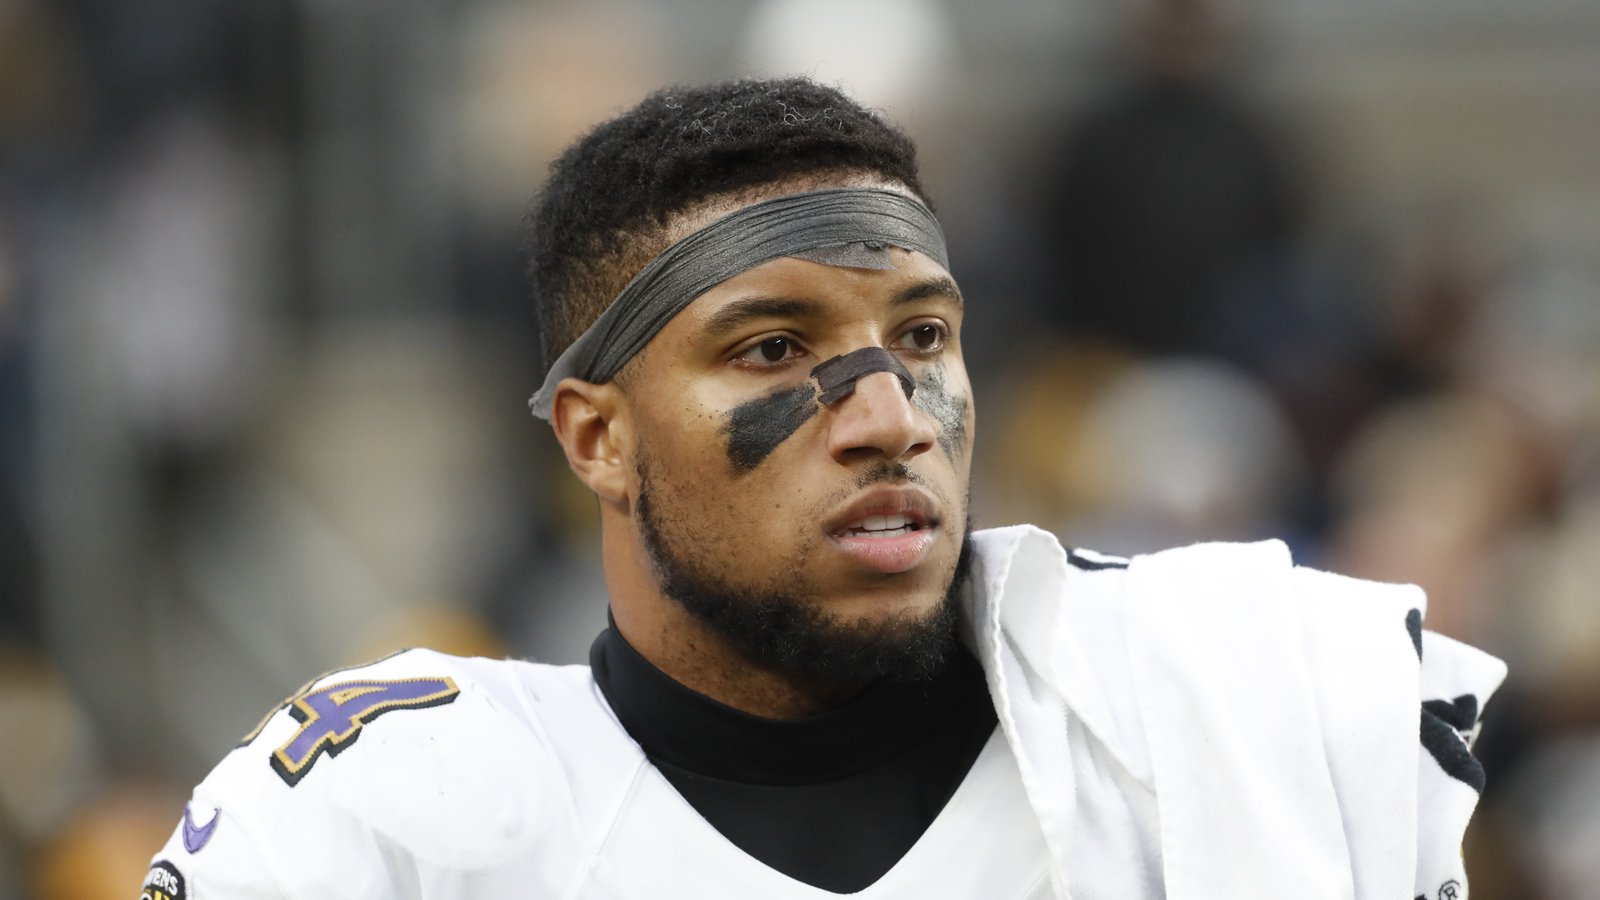 Ravens CB Marlon Humphrey added an interesting food to his diet while injured